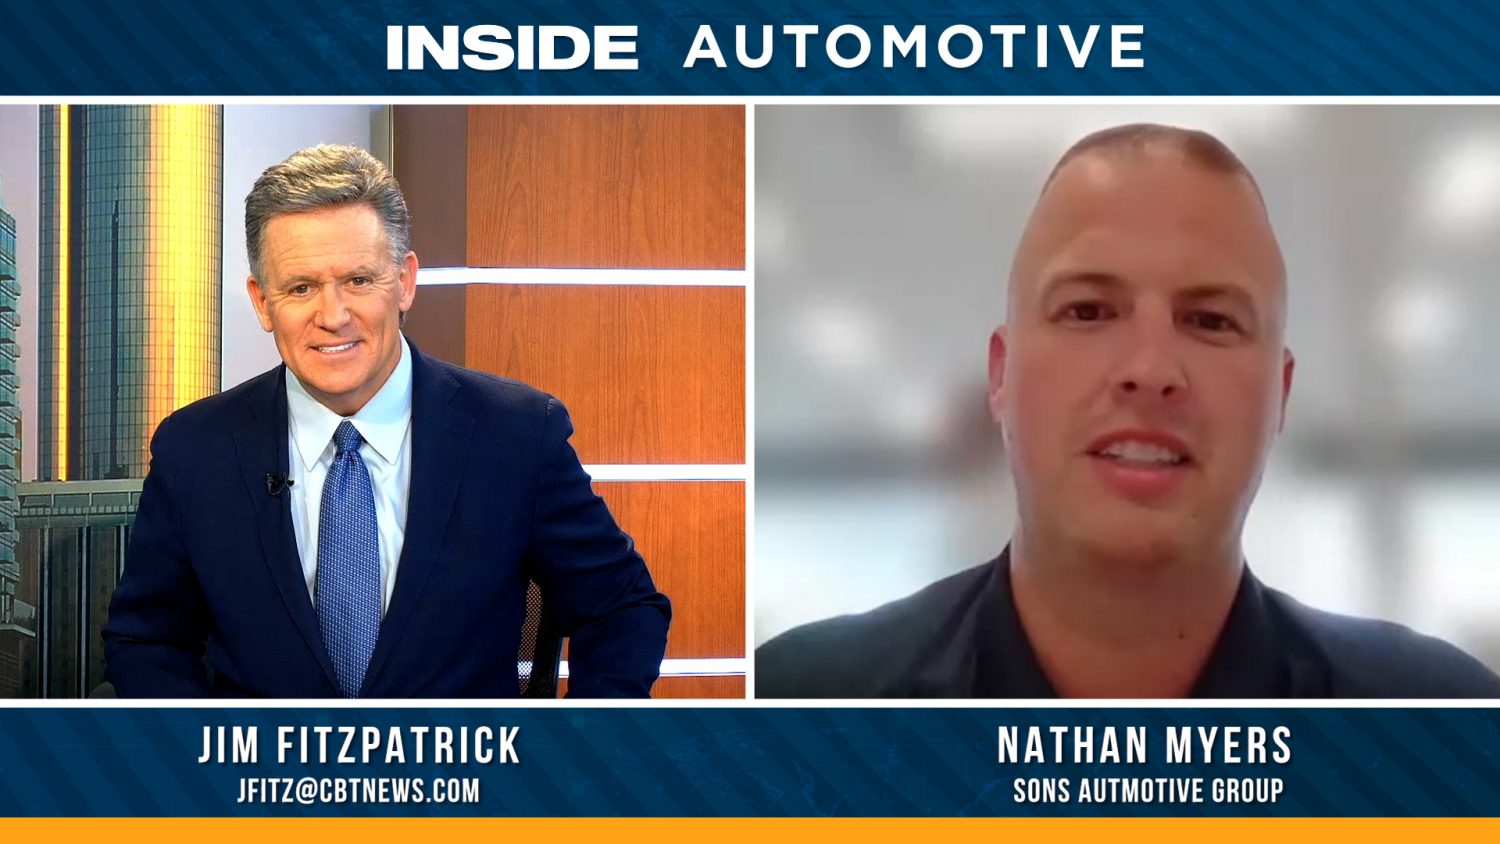 In a market as unpredictable as a roller coaster ride, Nate Myers, joins us on today's episode of Inside Automotive to discuss the trends.